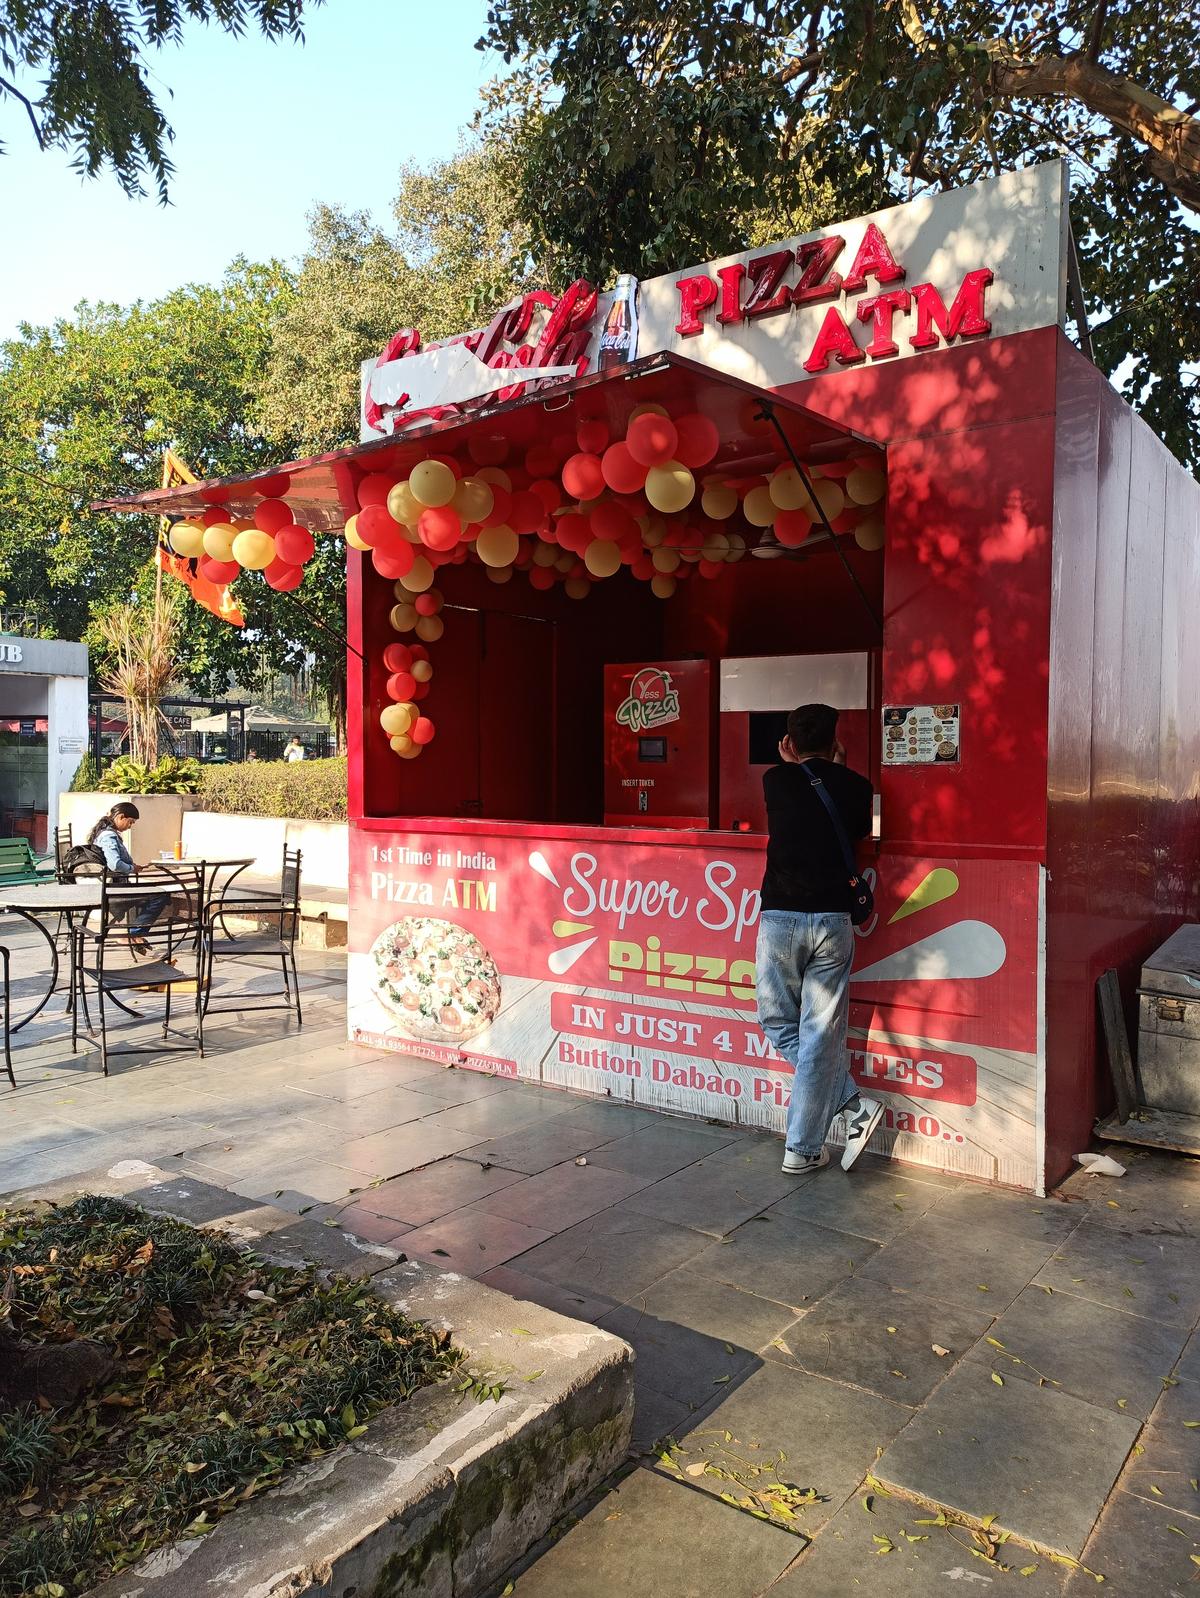 The Pizza ATM at Chandigarh’s Sukhna Lake